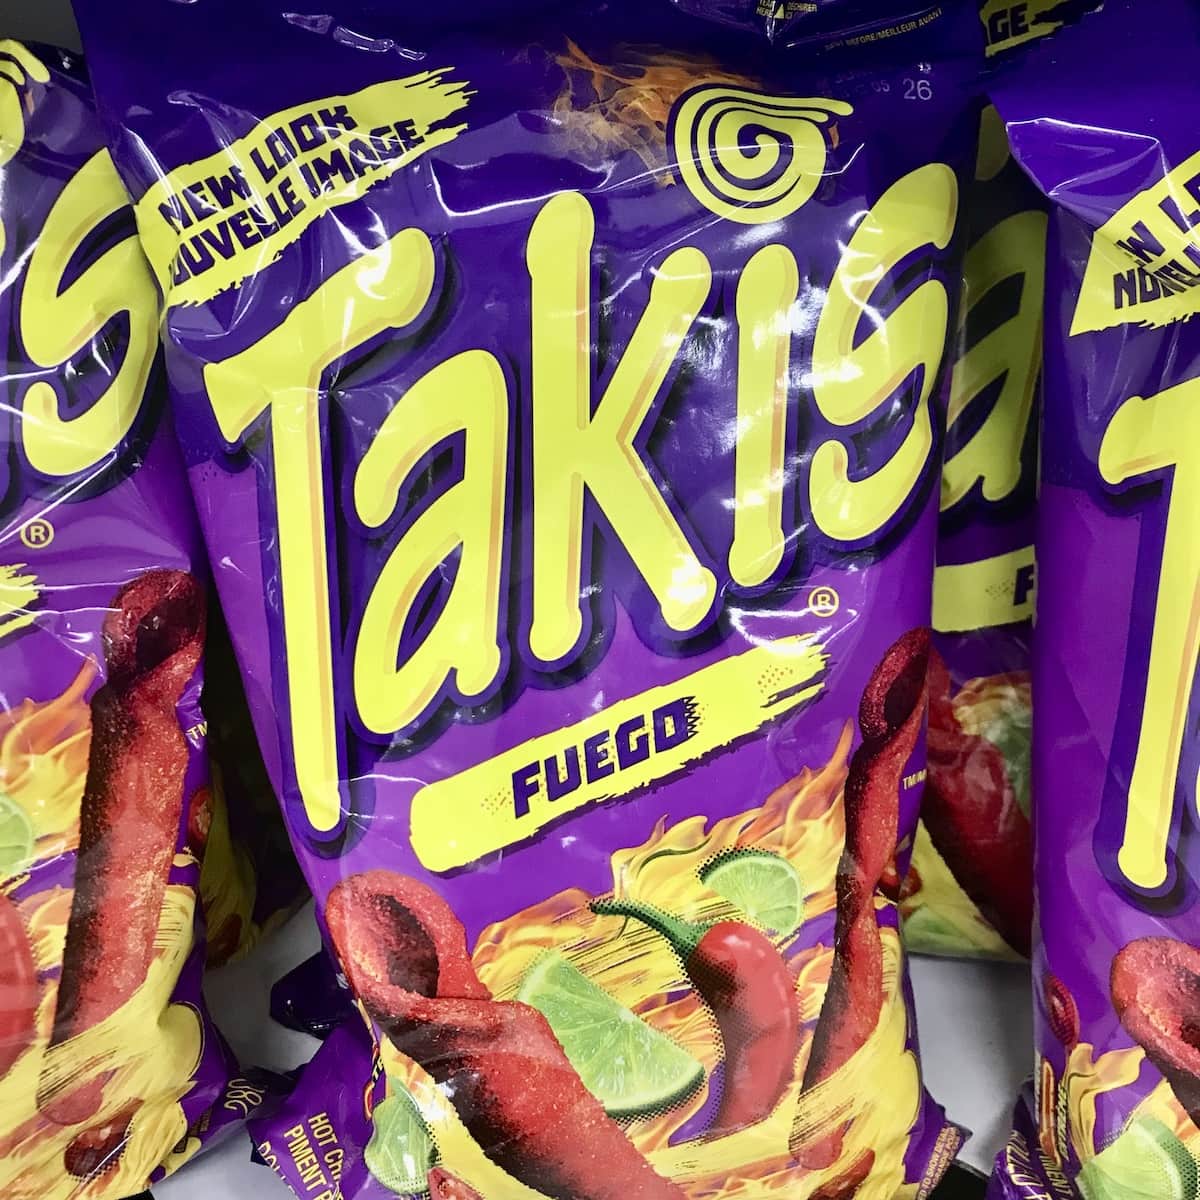 A package of Takis Fuego.